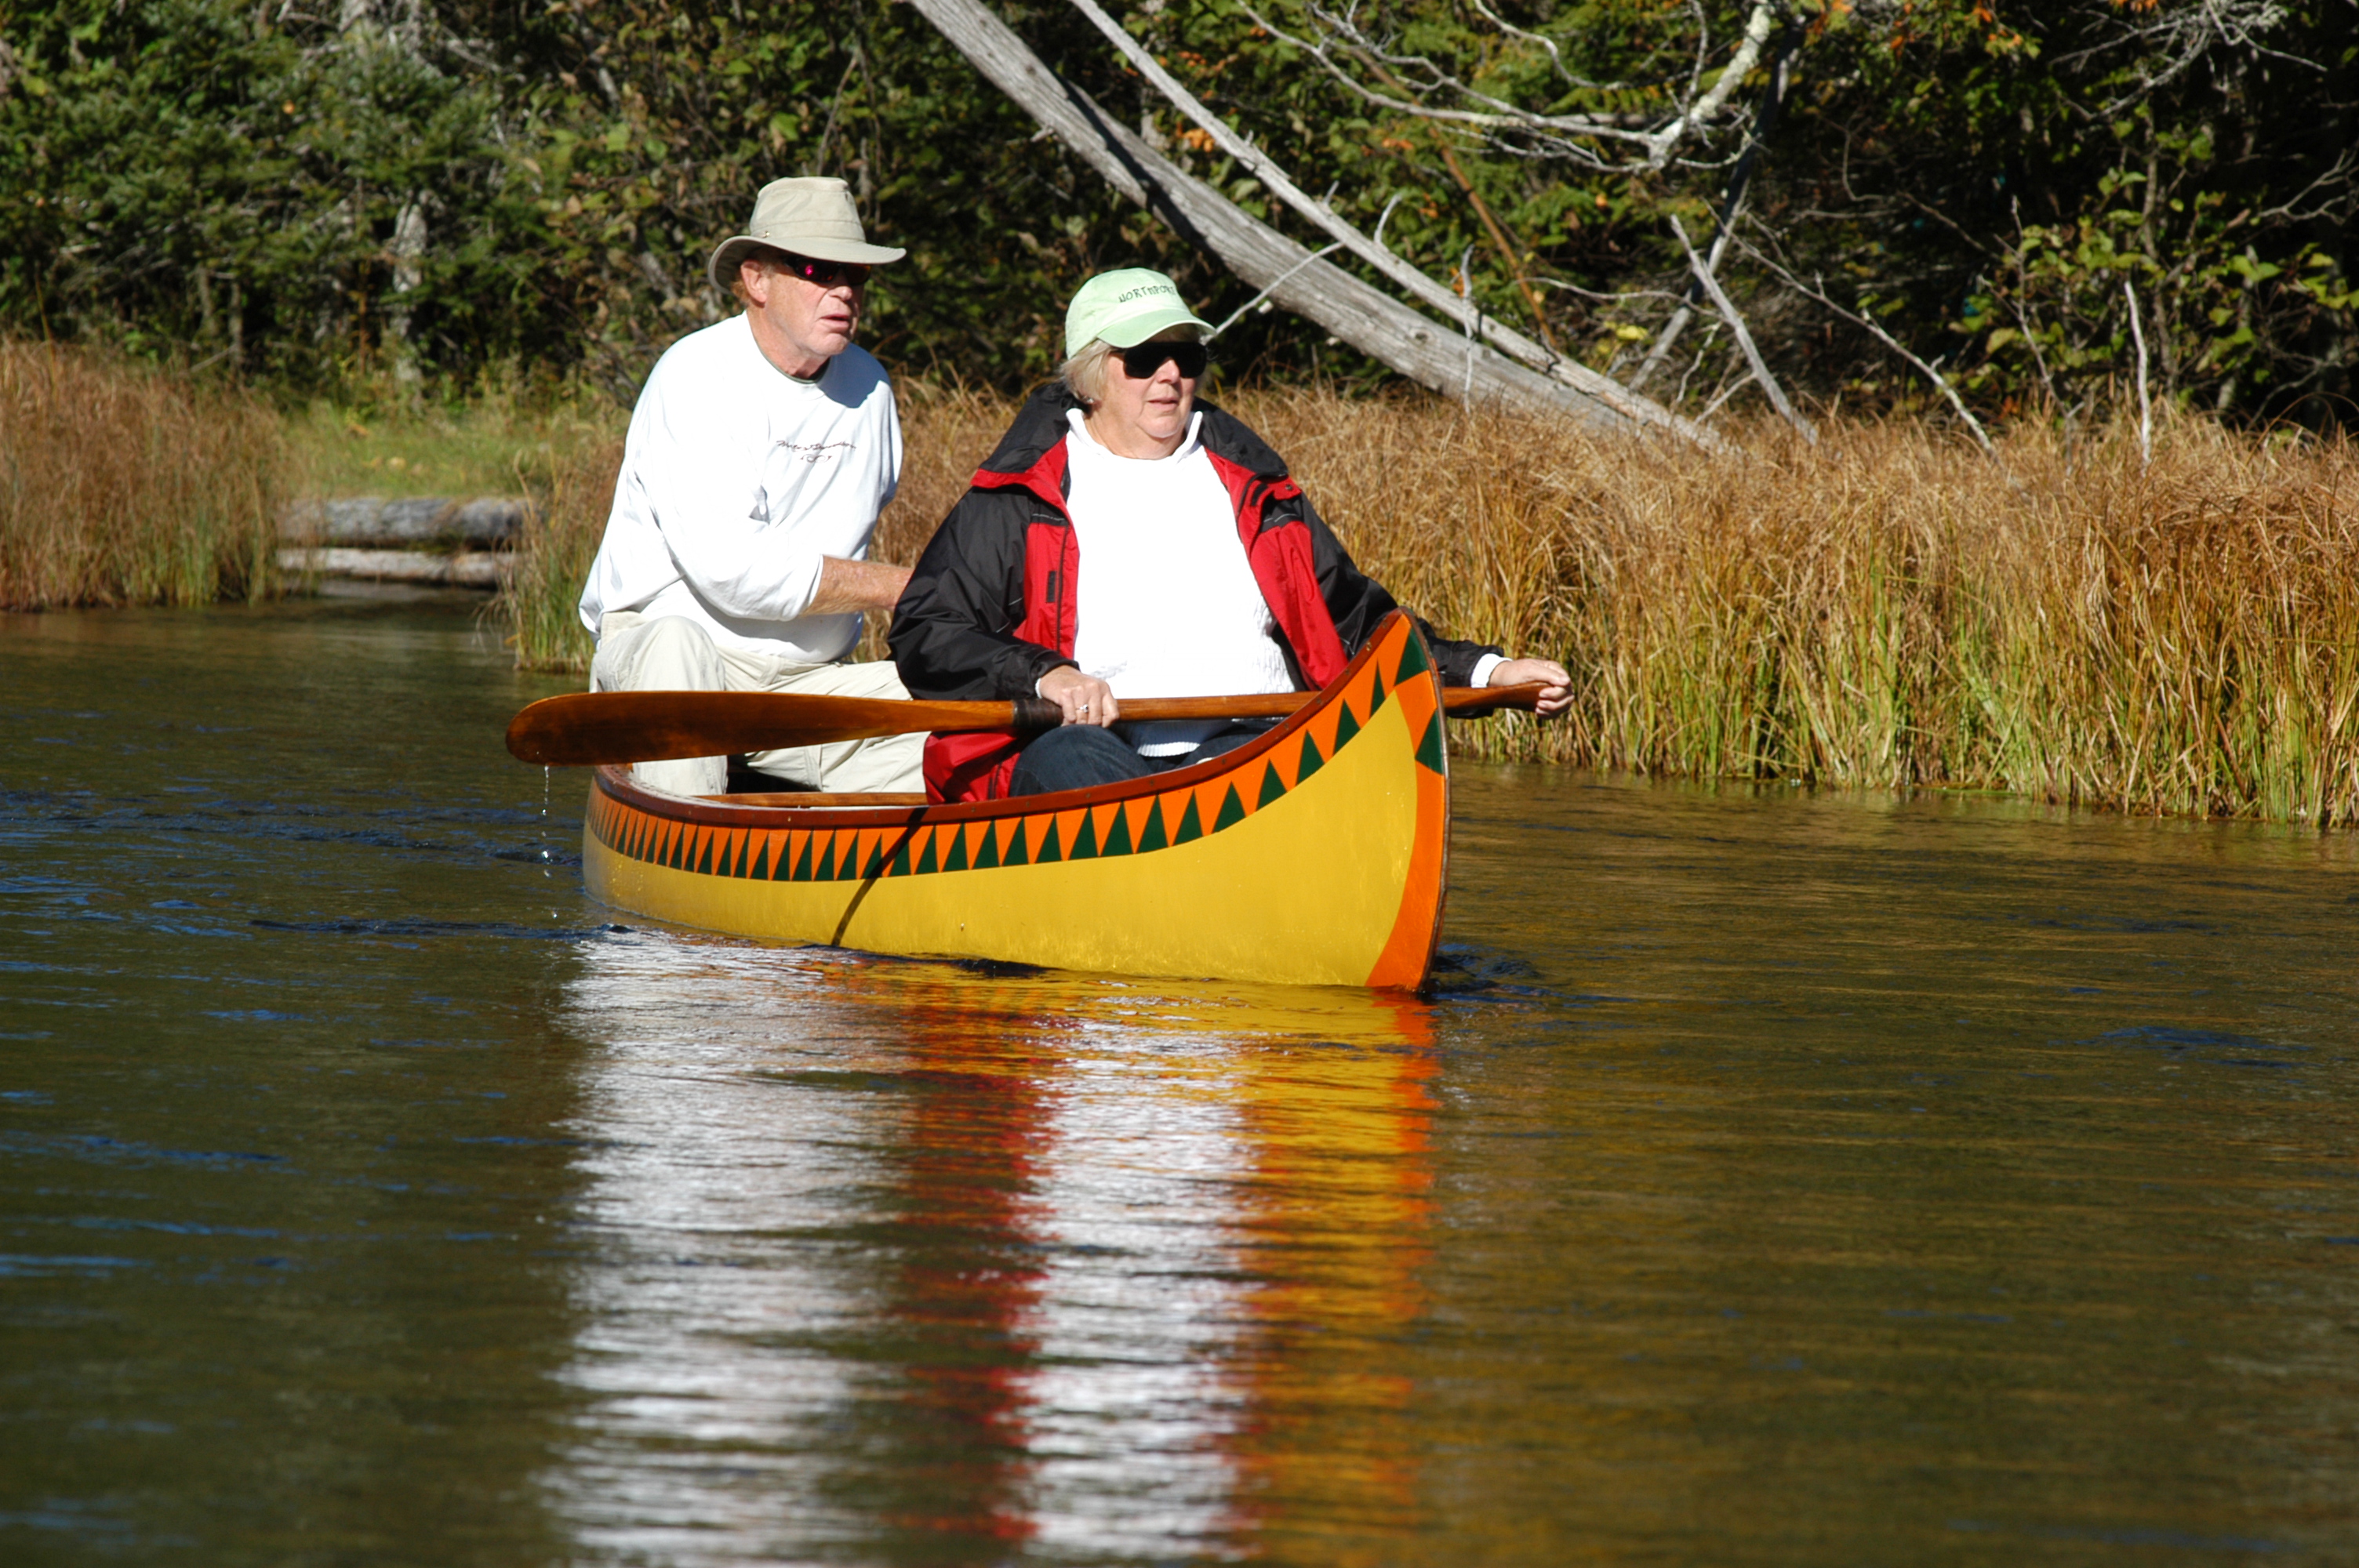 Gallery: Wooden canoe gathering on the AuSable River | The Outdoor 